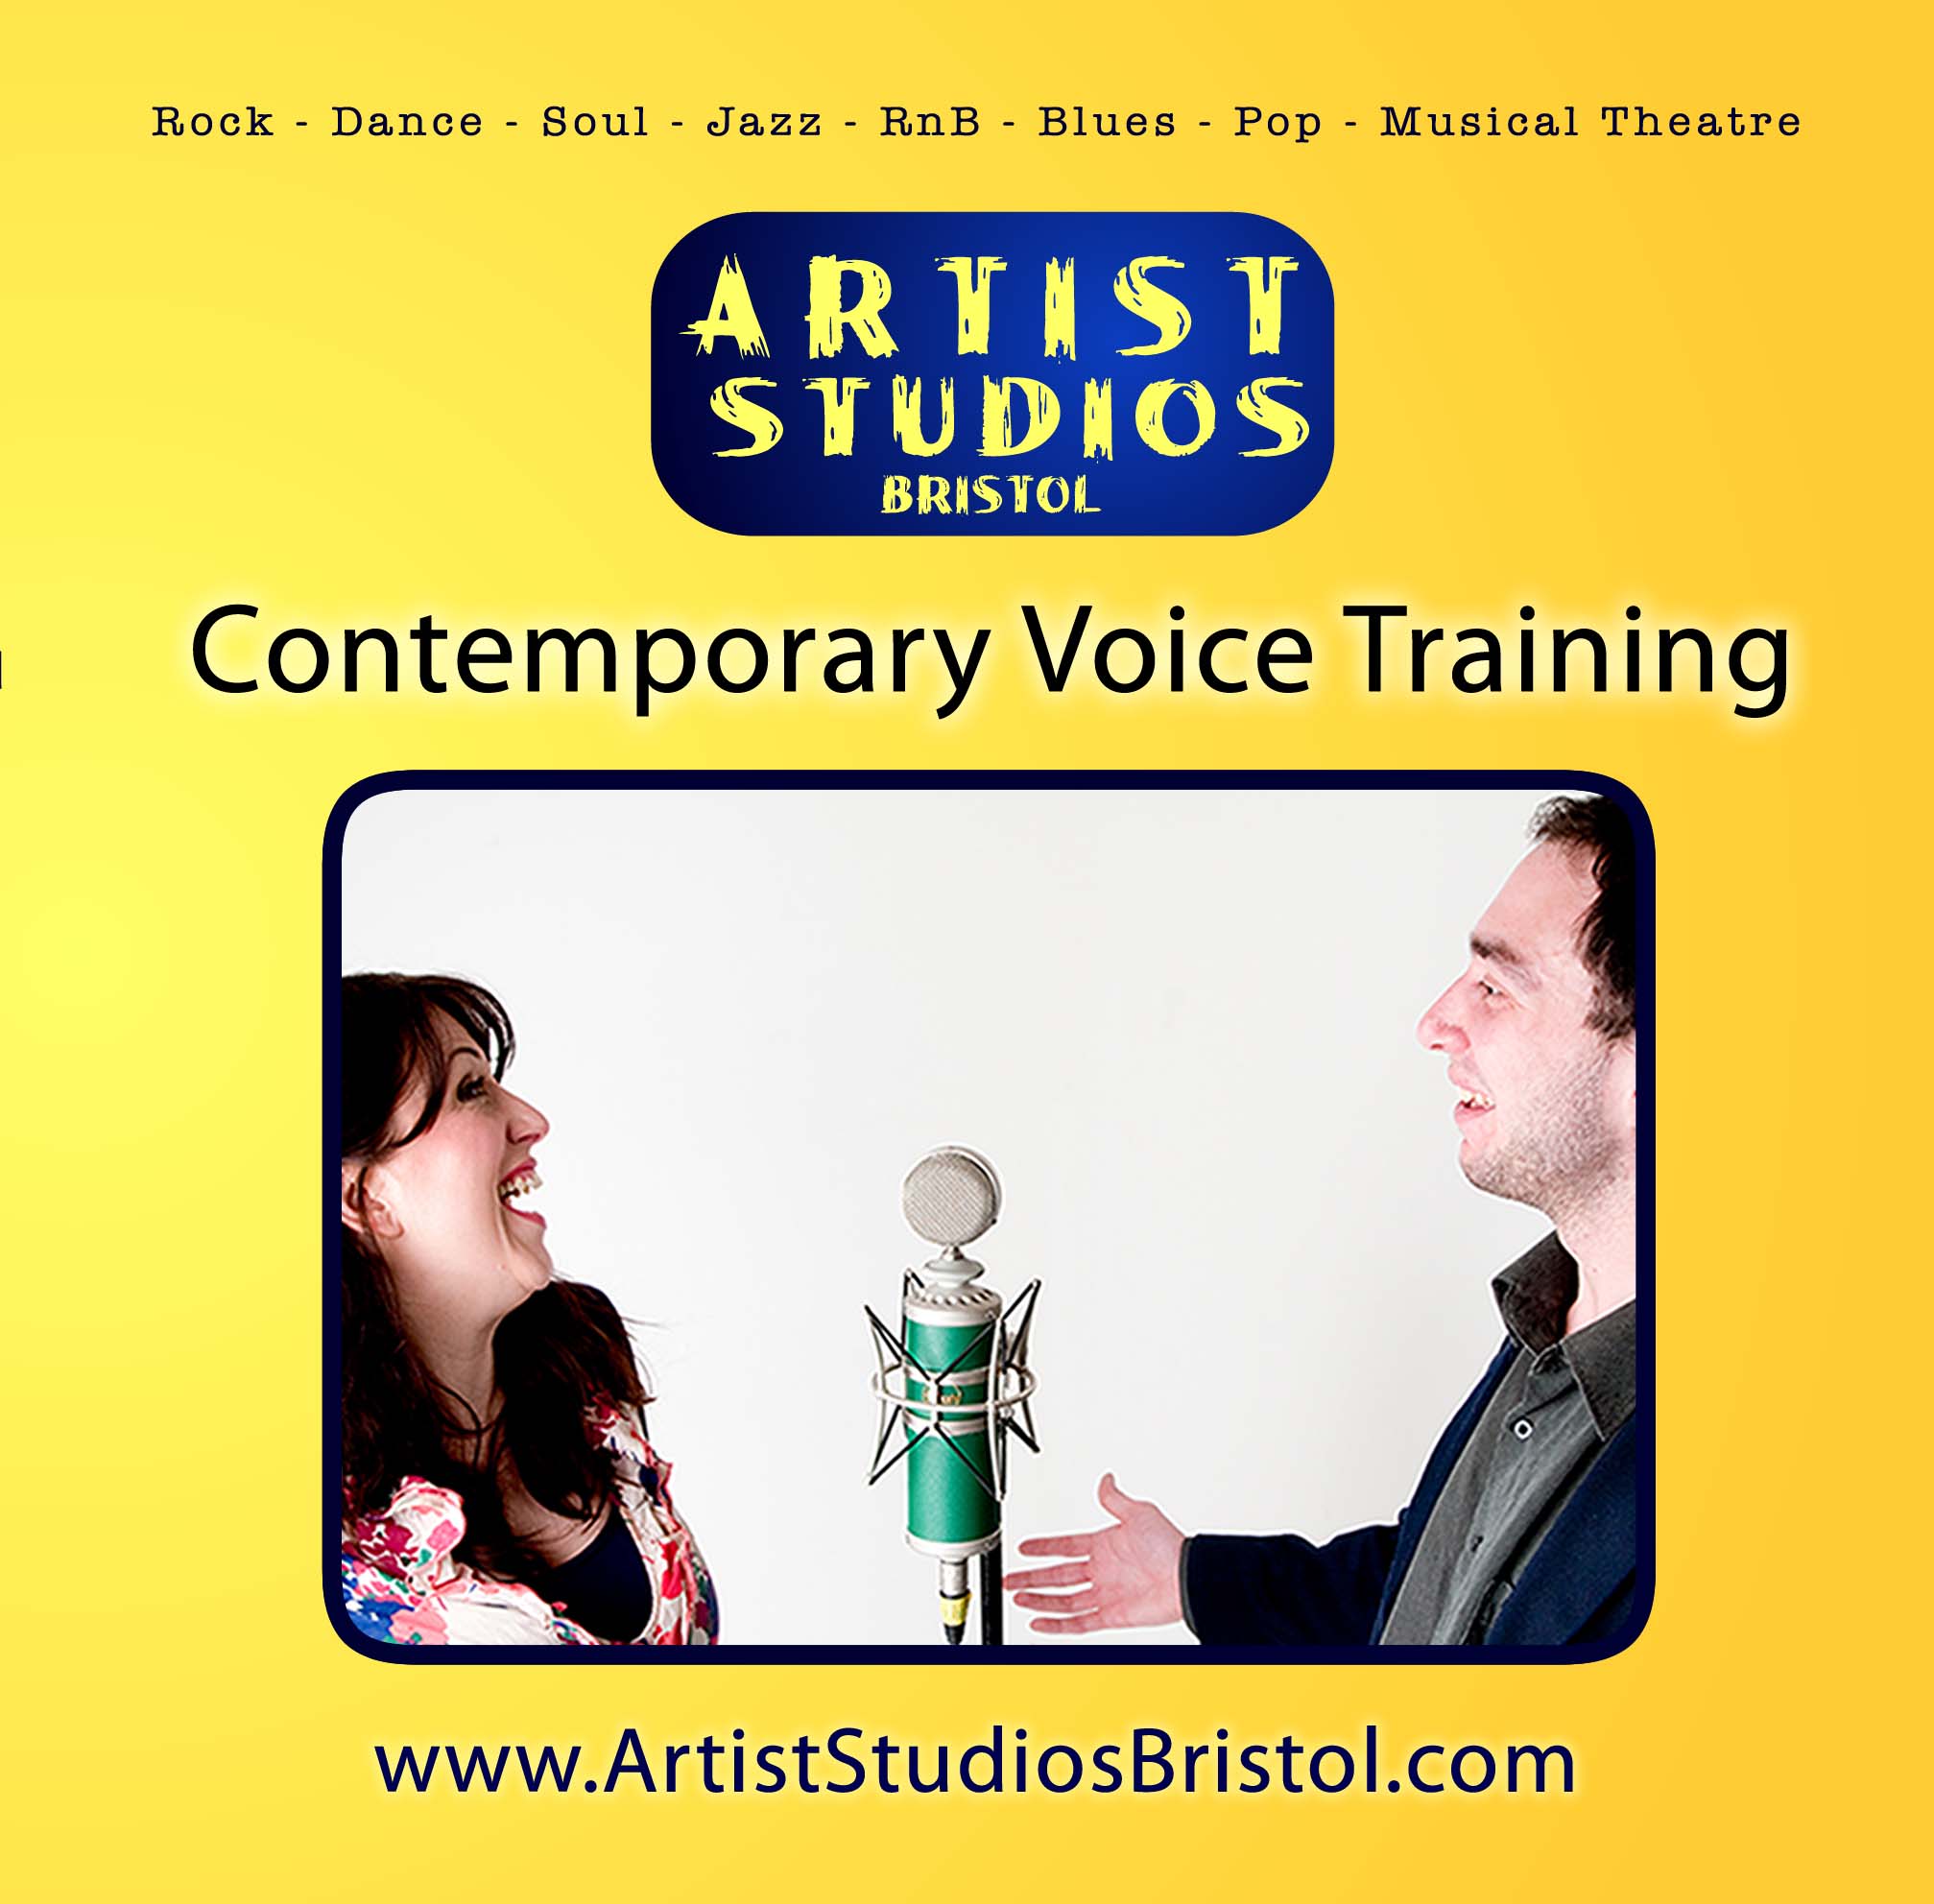 Train your voice with our Contemporary Voice Technique Training guide